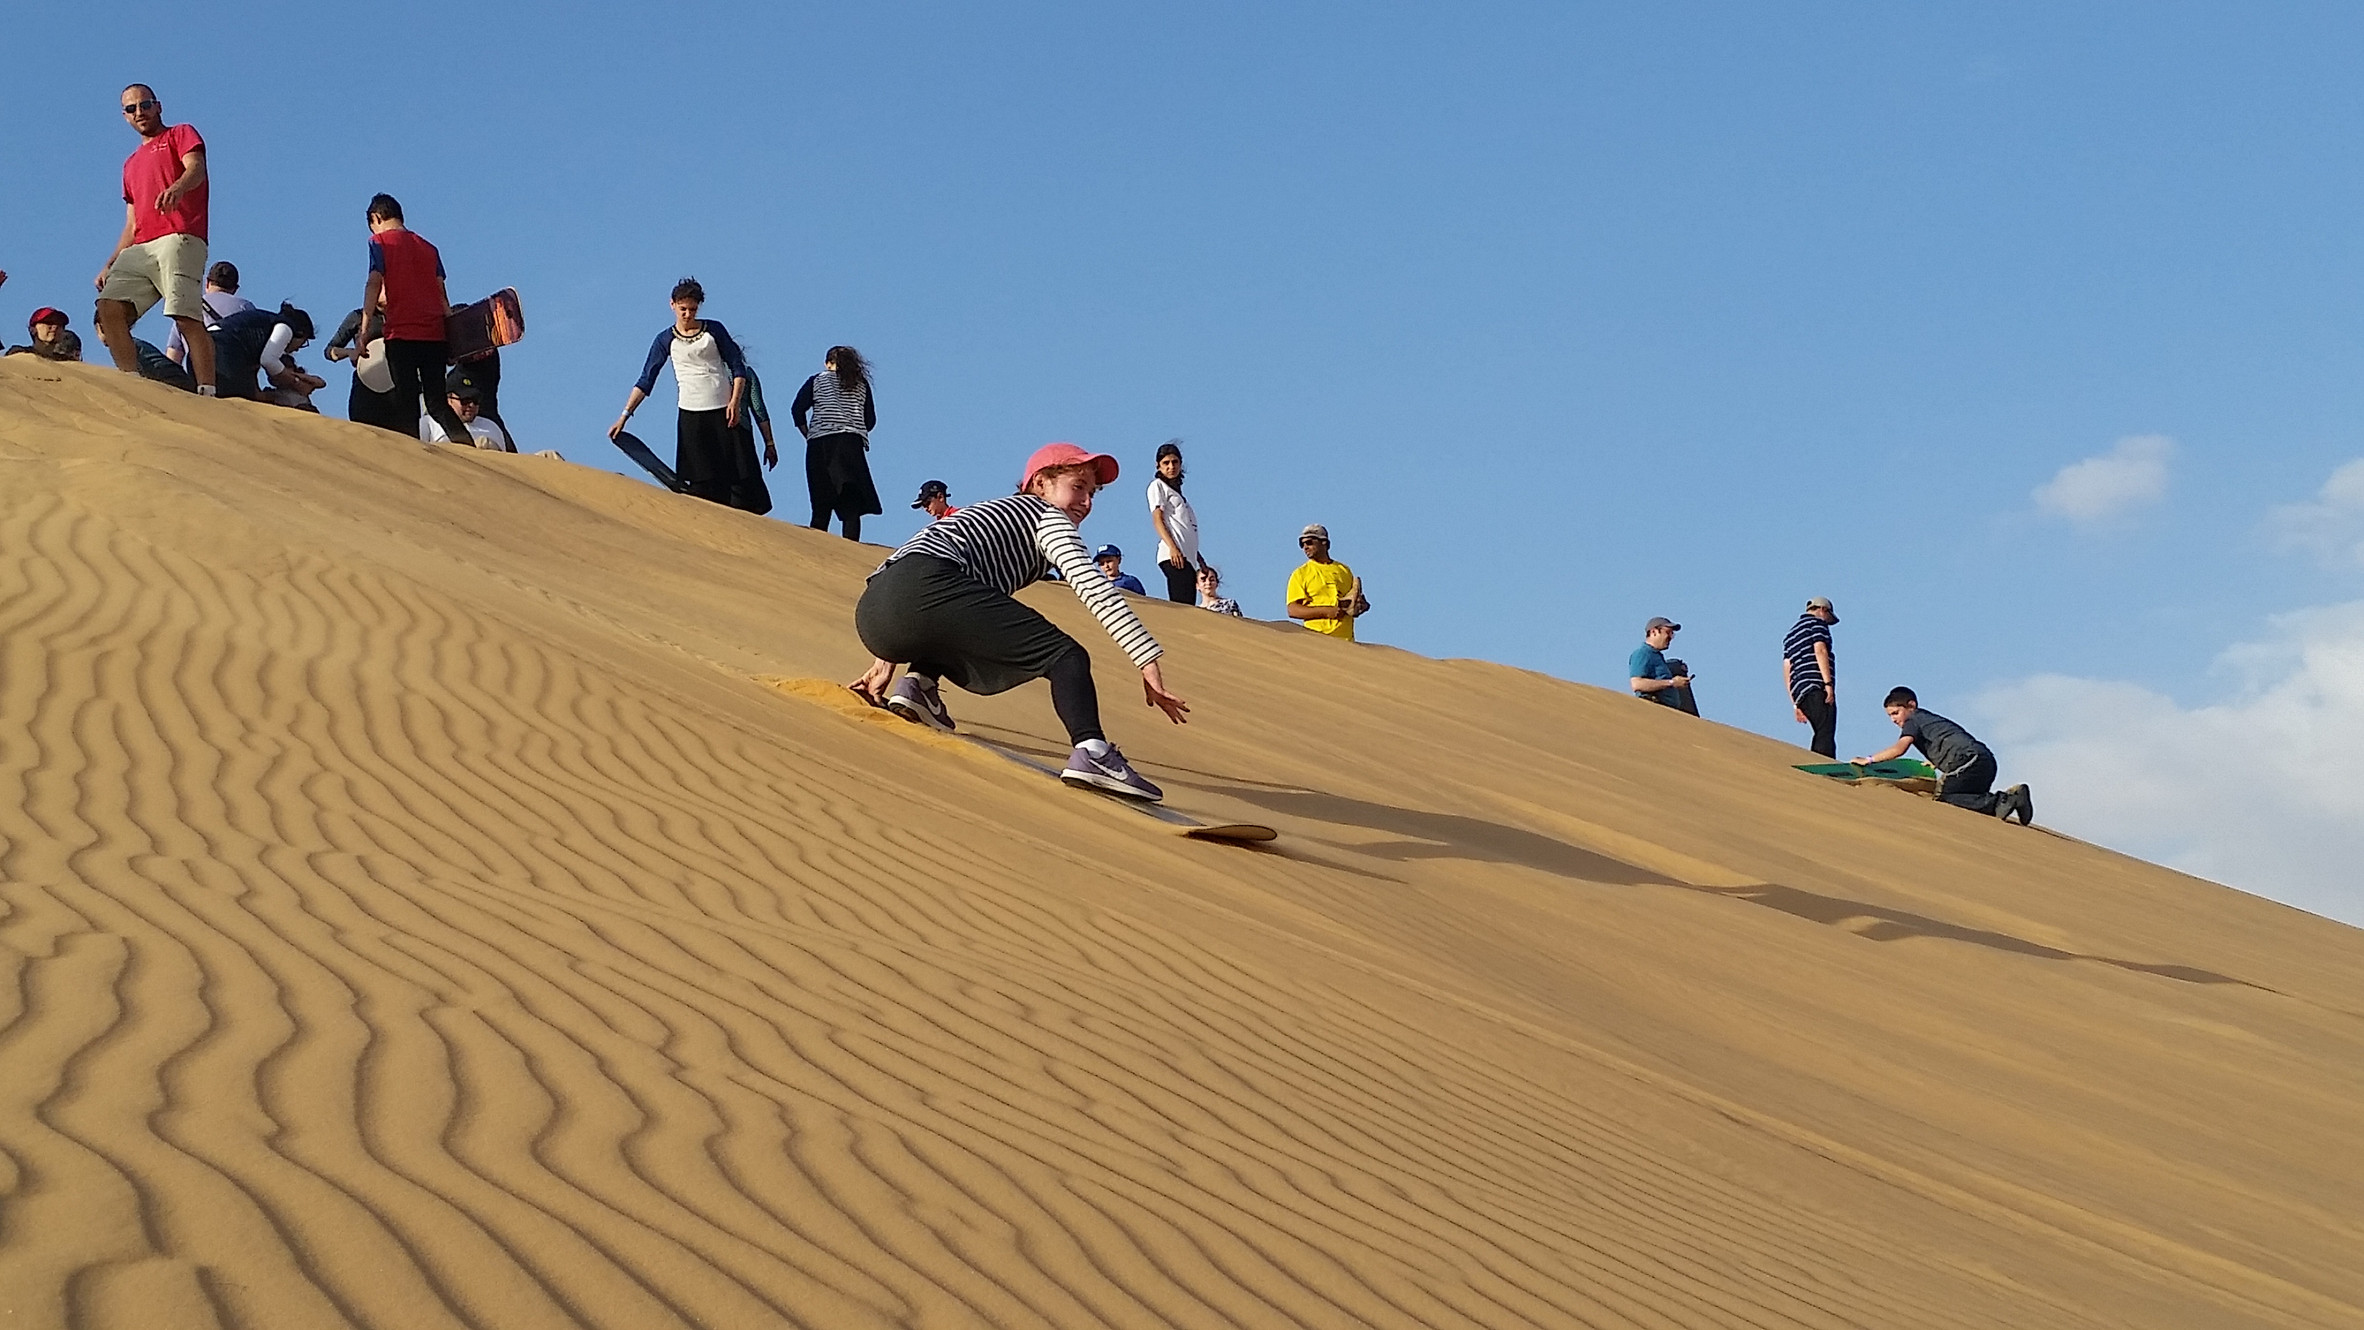 Sparrow in the Desert in Israel, Middle East | Sandboarding - Rated 0.8